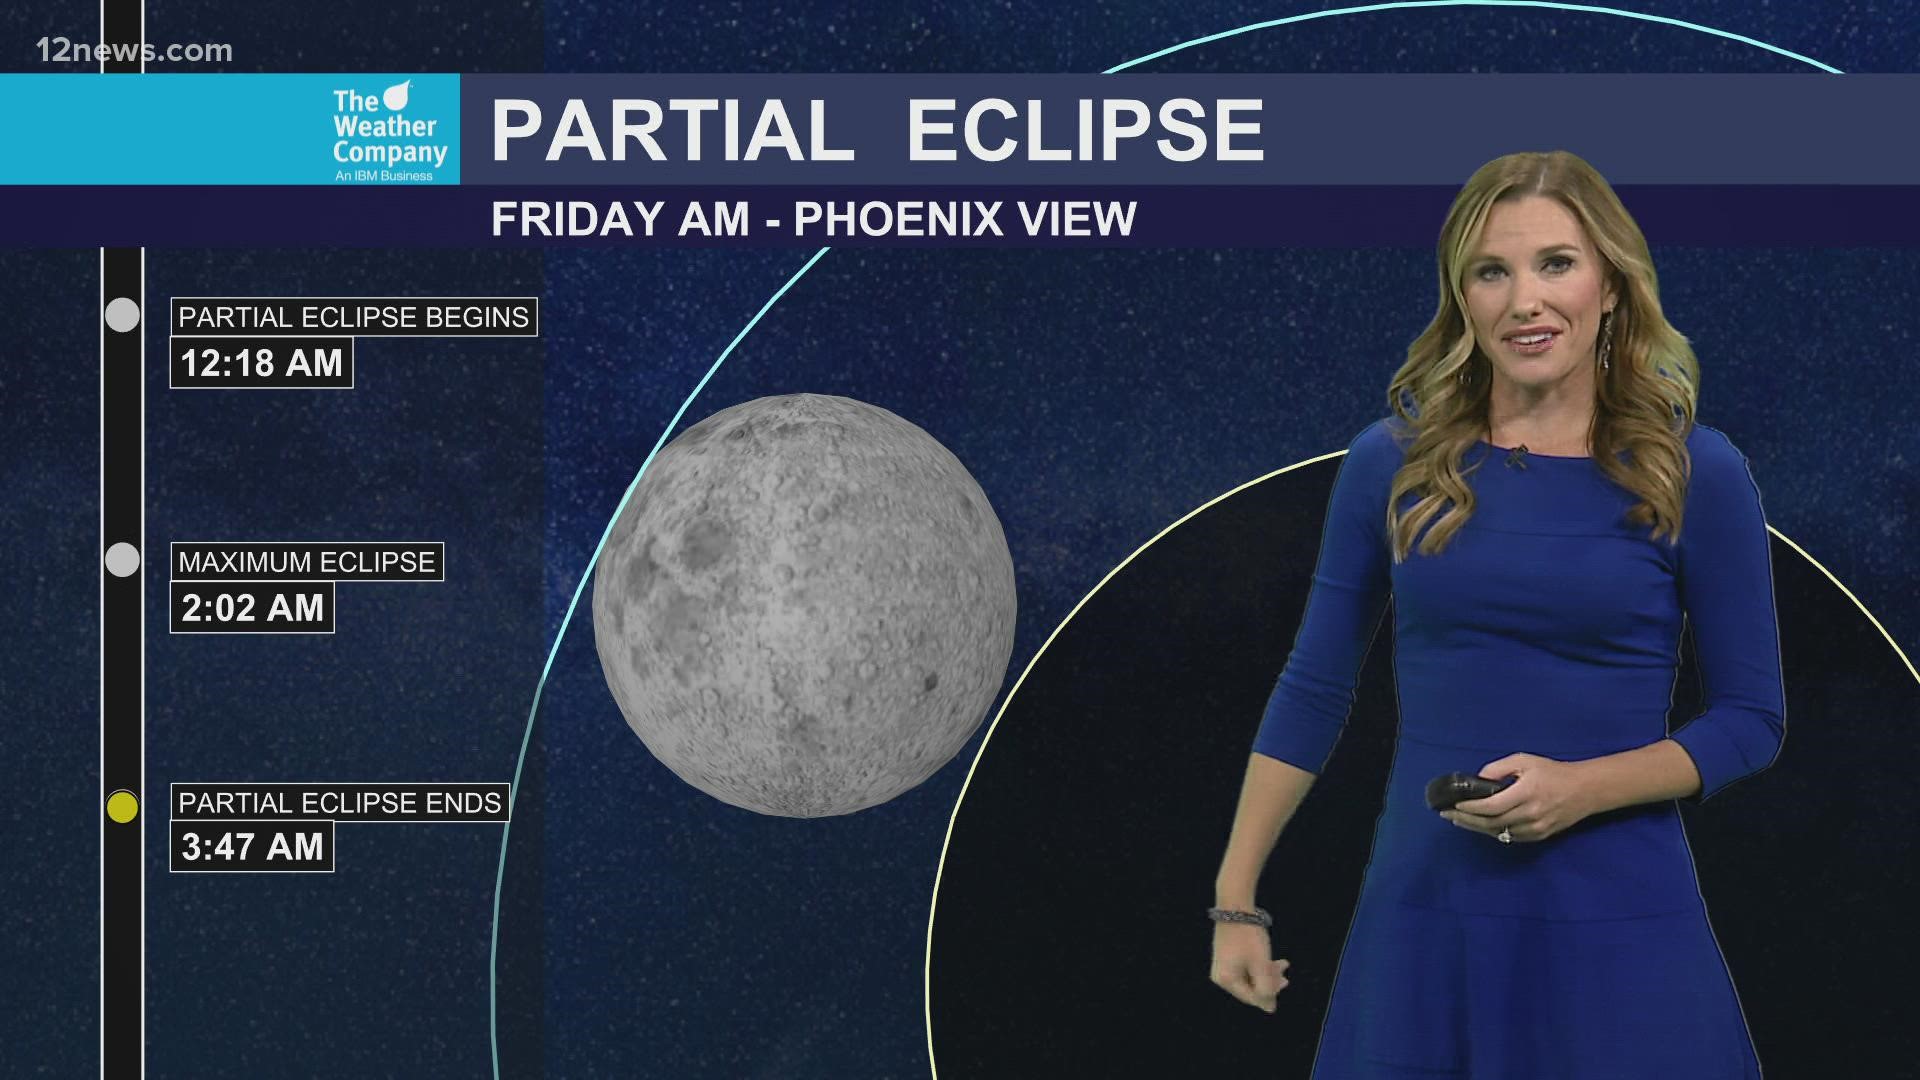 The longest partial lunar eclipse in nearly 600 years will happen late Thursday night. Conditions in Arizona won't be ideal, but you can still catch a glimpse!